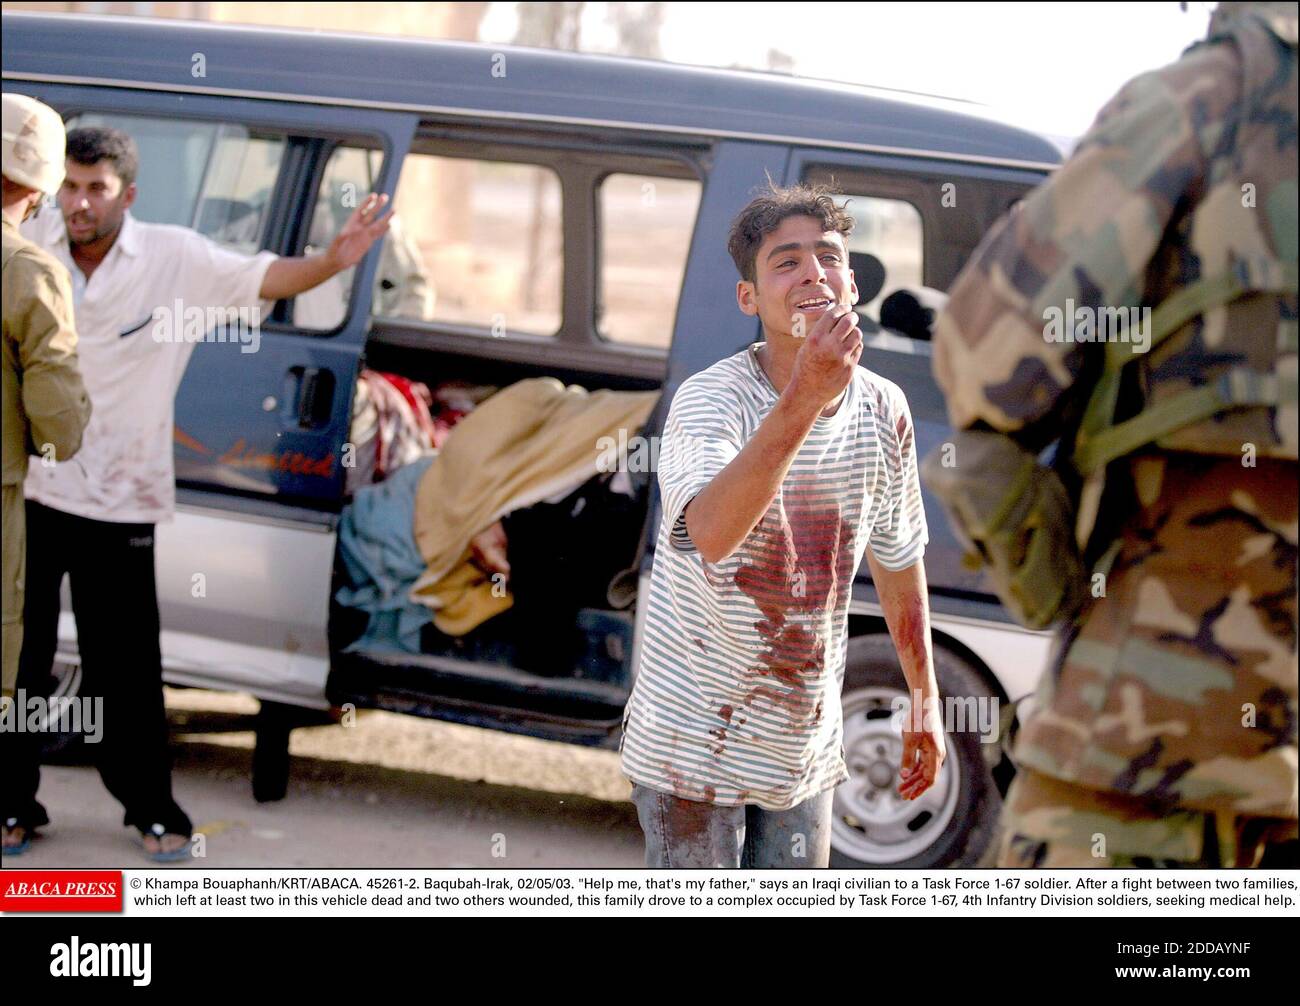 NO FILM, NO VIDEO, NO TV, NO DOCUMENTARY - © Khampa Bouaphanh/KRT/ABACA. 45261-2. Baqubah-Irak, 02/05/03. Help me, that's my father, says an Iraqi civilian to a Task Force 1-67 soldier. After a fight between two families, which left at least two in this vehicle dead and two others wounded, this fa Stock Photo